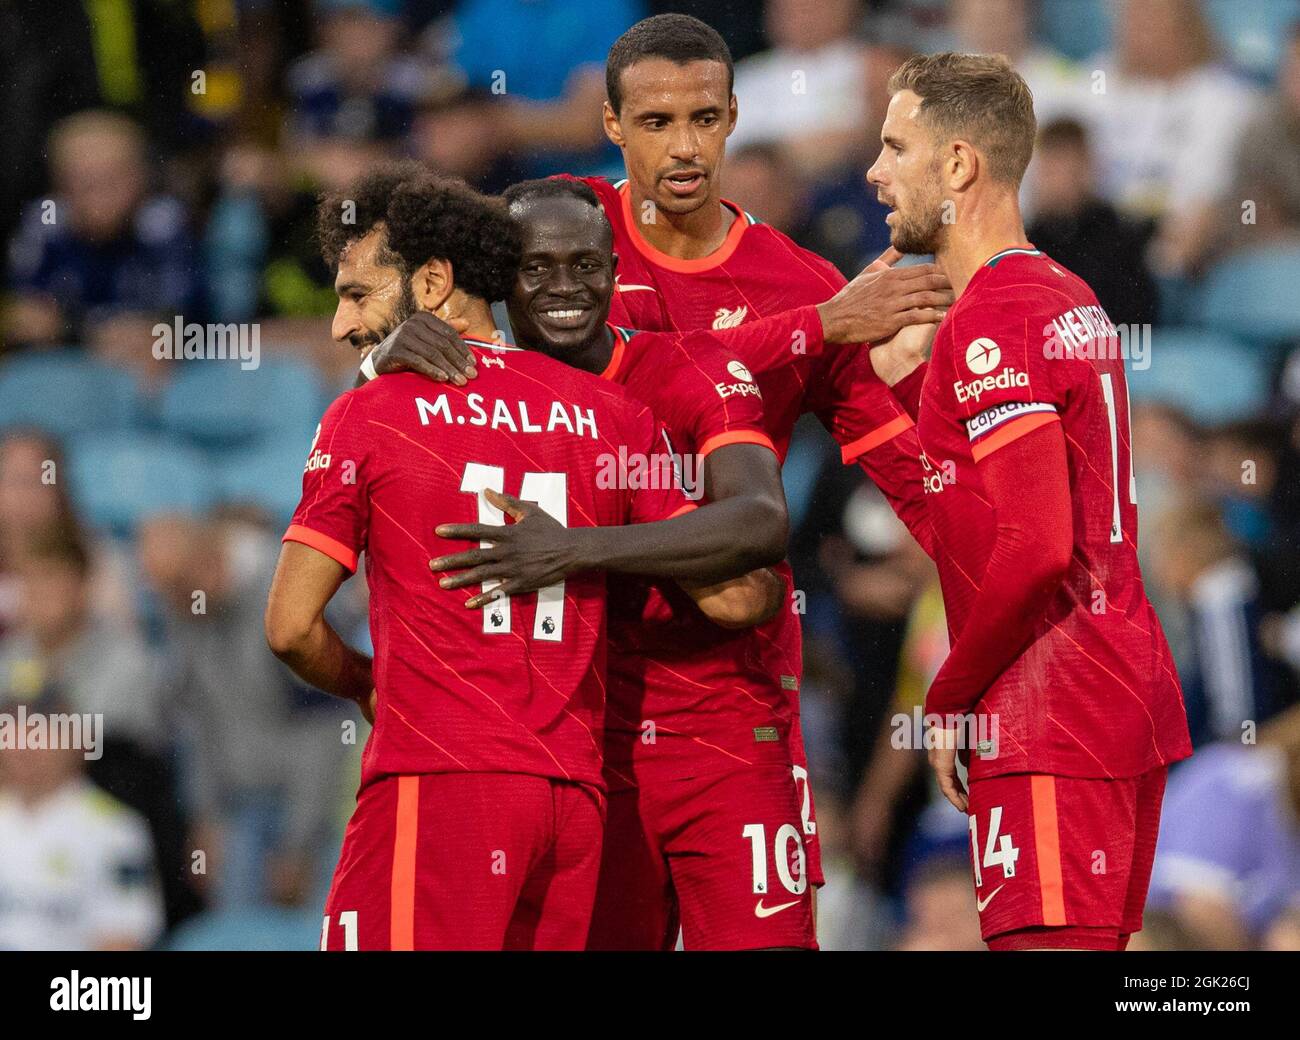 Leeds. 13th Sep, 2021. Liverpool's Sadio Mane (2nd L) celebrates with teammates Mohamed Salah (1st L), Joel Matip (2nd R) and Jordan Henderson after scoring during the Premier League football match between Leeds United and Liverpool in Leeds, Britain, on Sept. 12, 2021. Credit: Xinhua/Alamy Live News Stock Photo